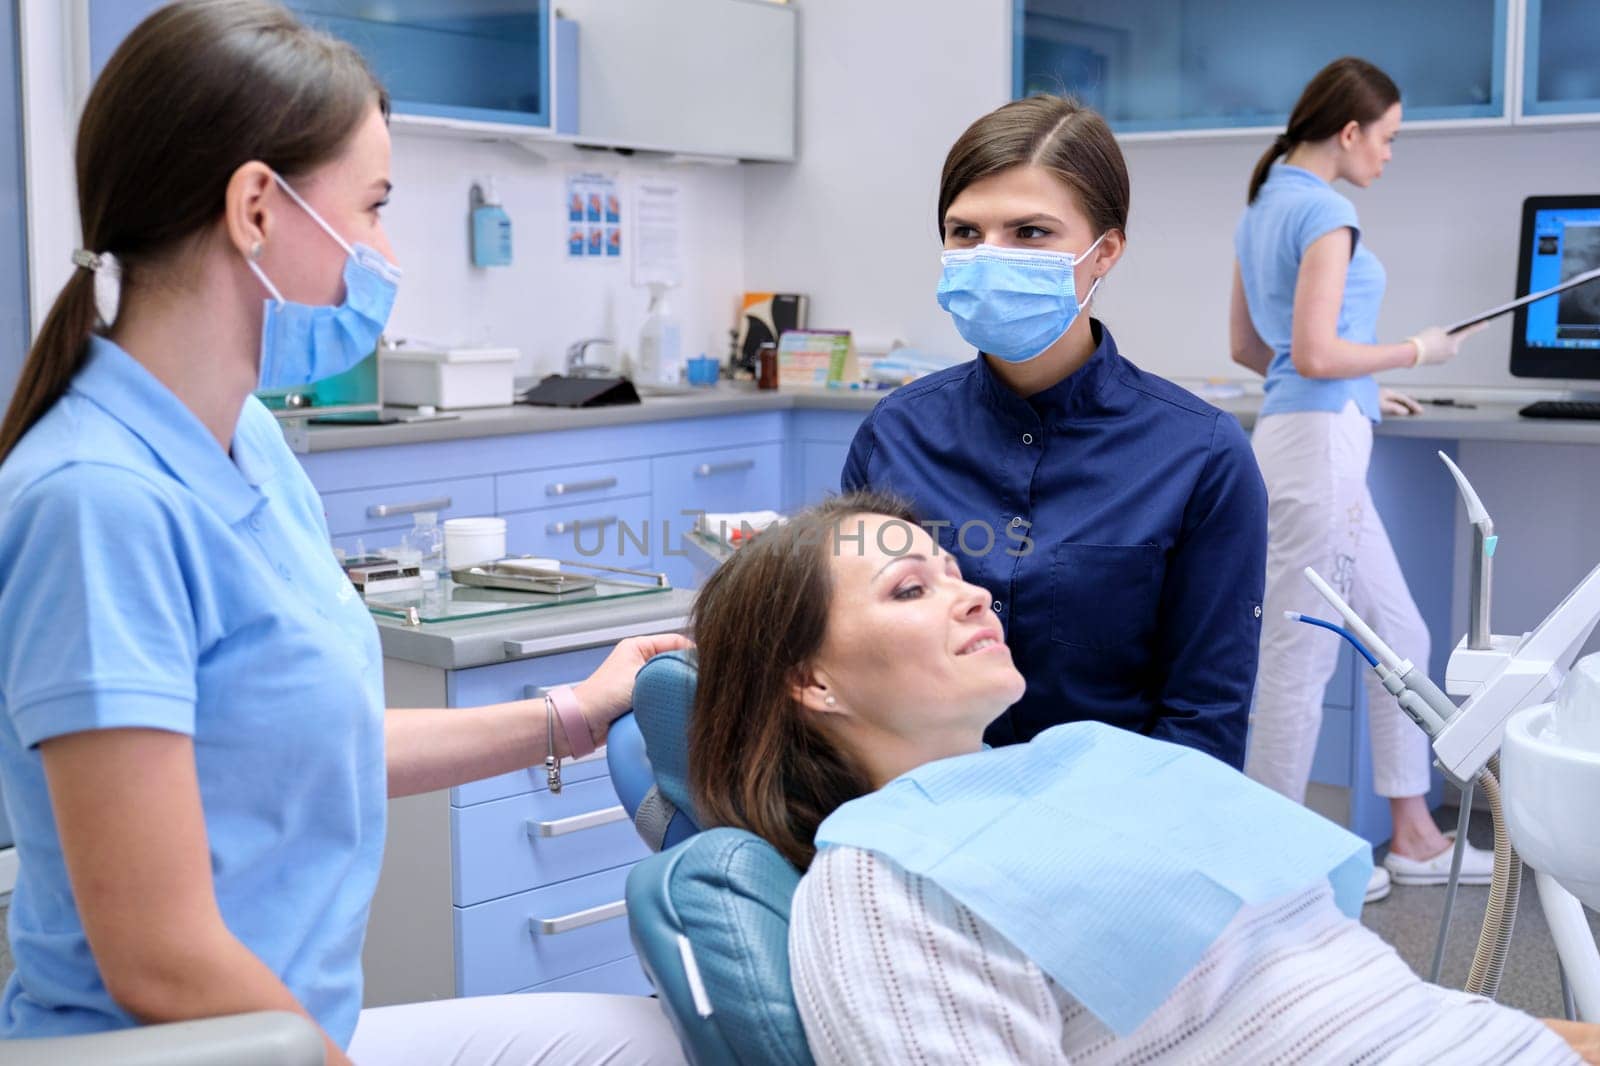 Examination, treatment of teeth, patient mature woman in dental chair by VH-studio